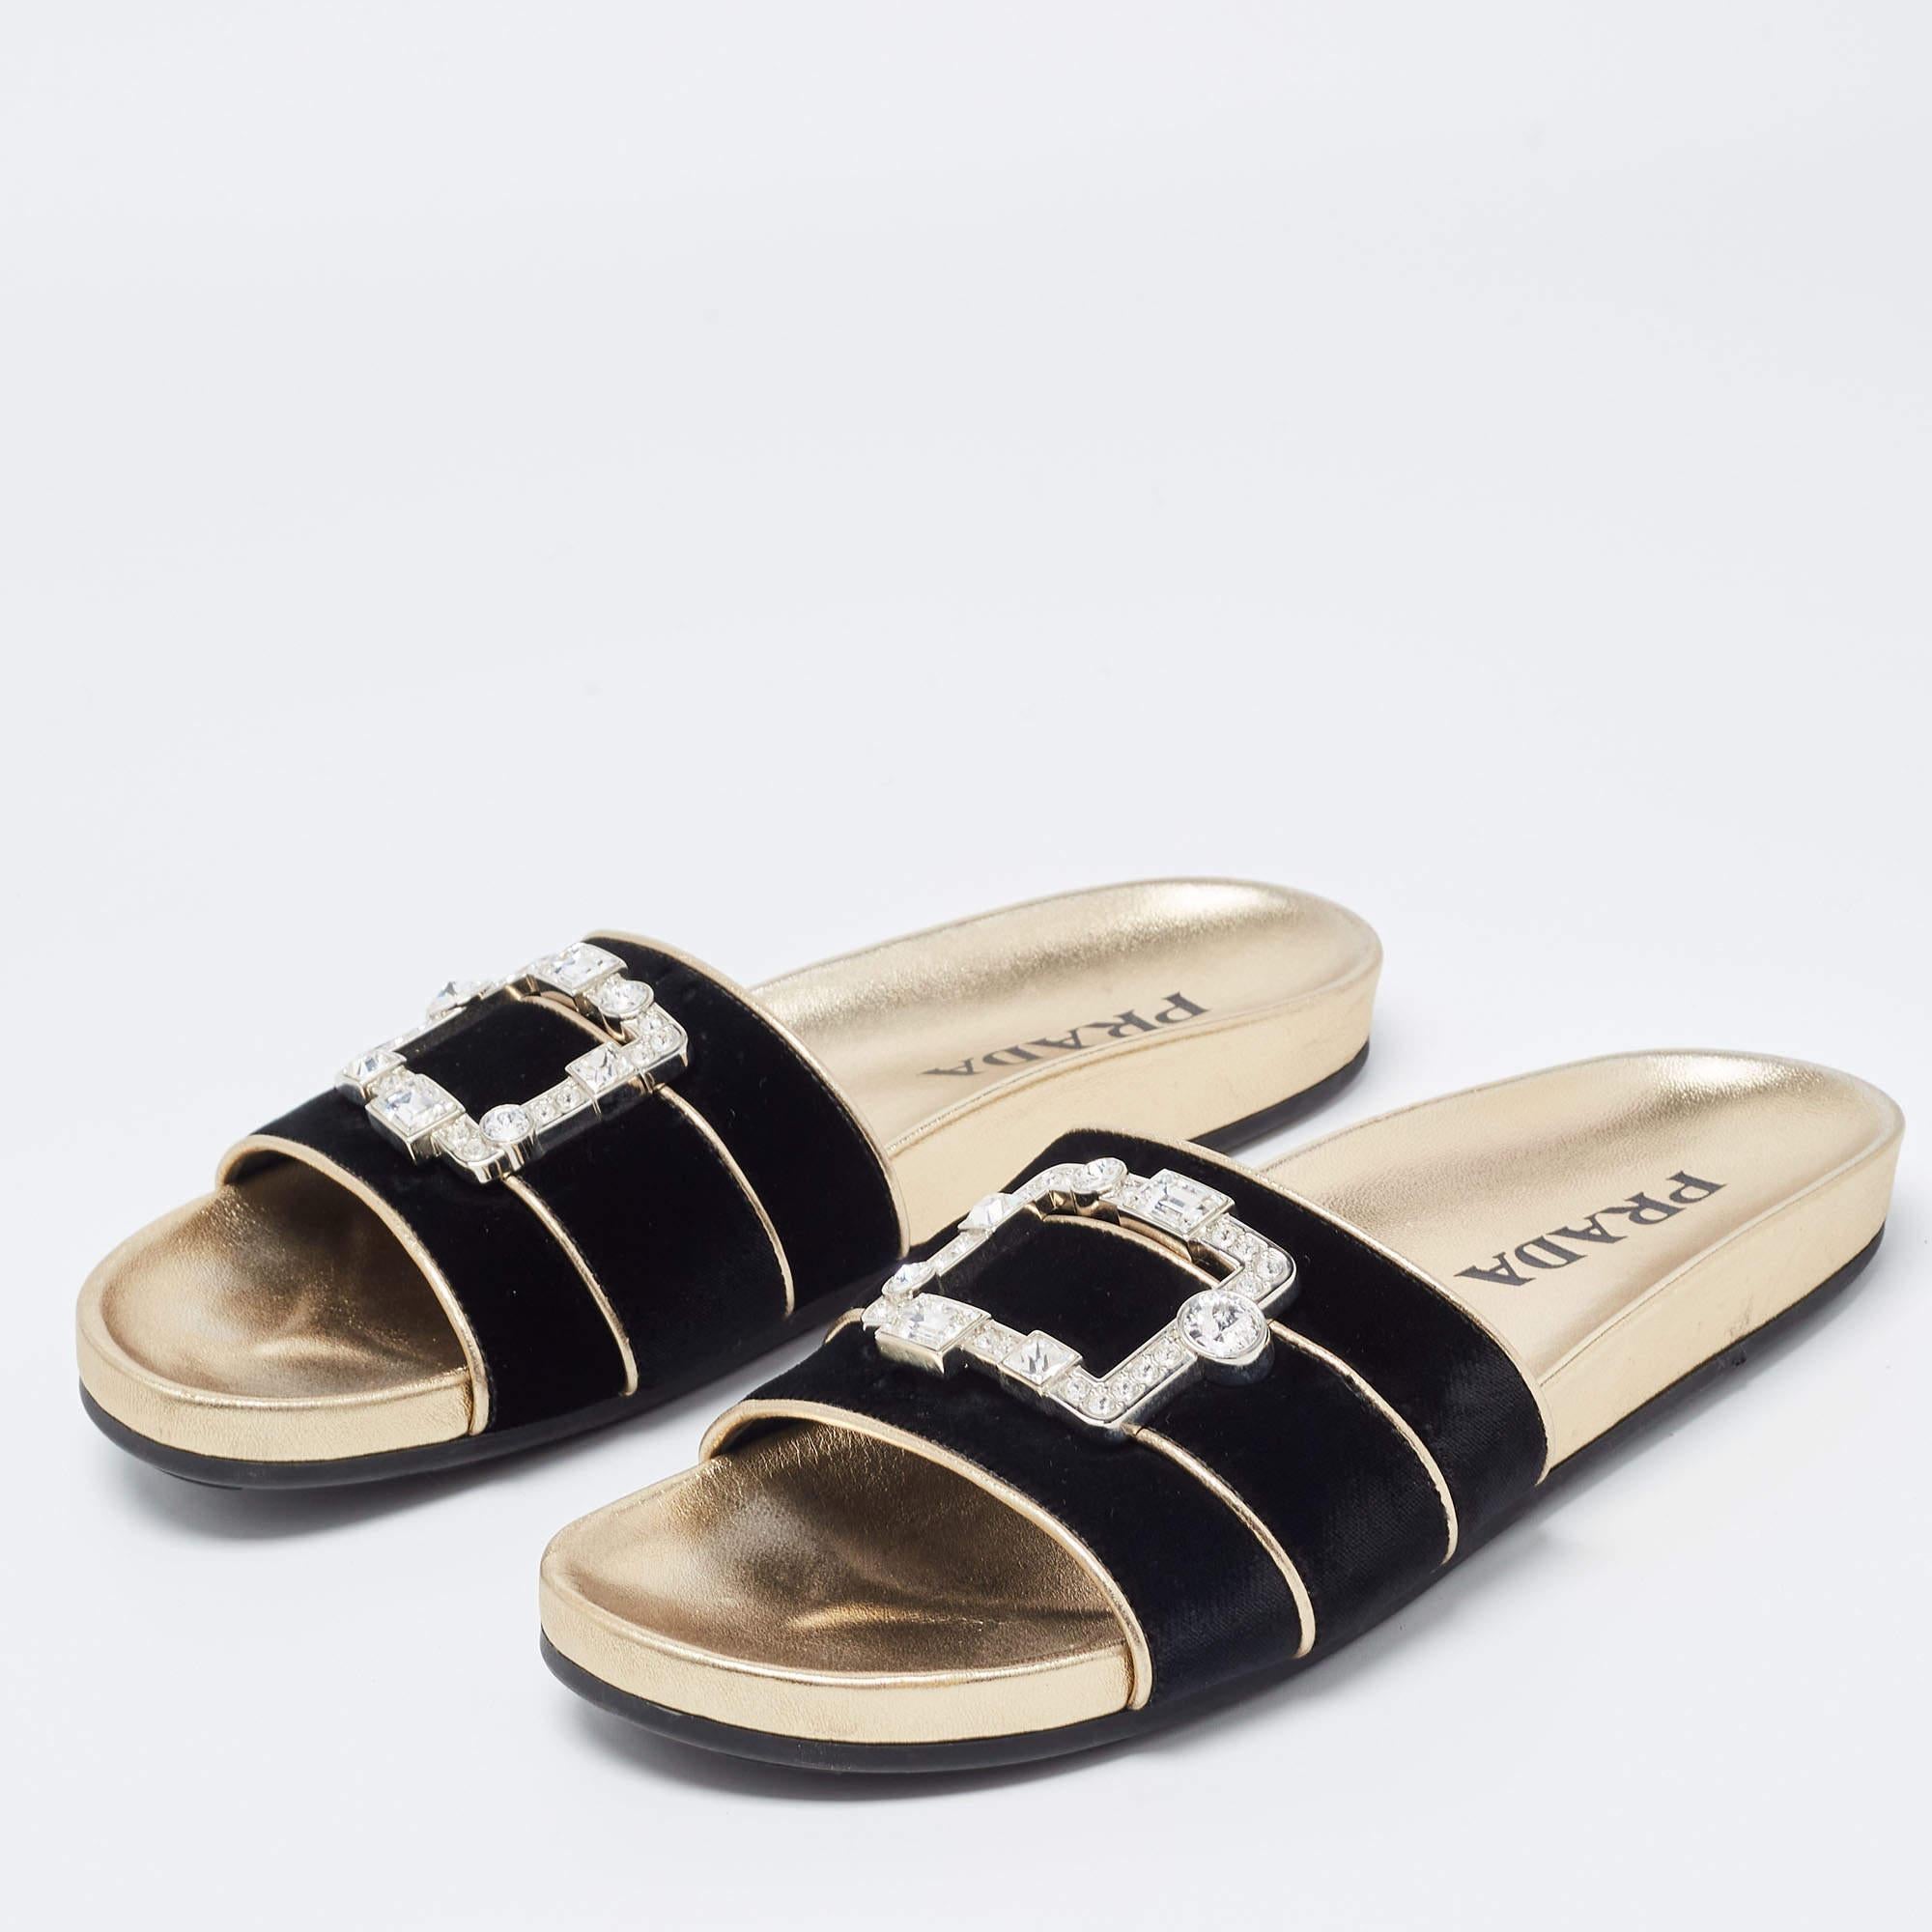 Enhance your casual looks with a touch of high style with these designer Prada slides. Rendered in quality material with a lovely hue adorning its expanse, this pair is a must-have!

